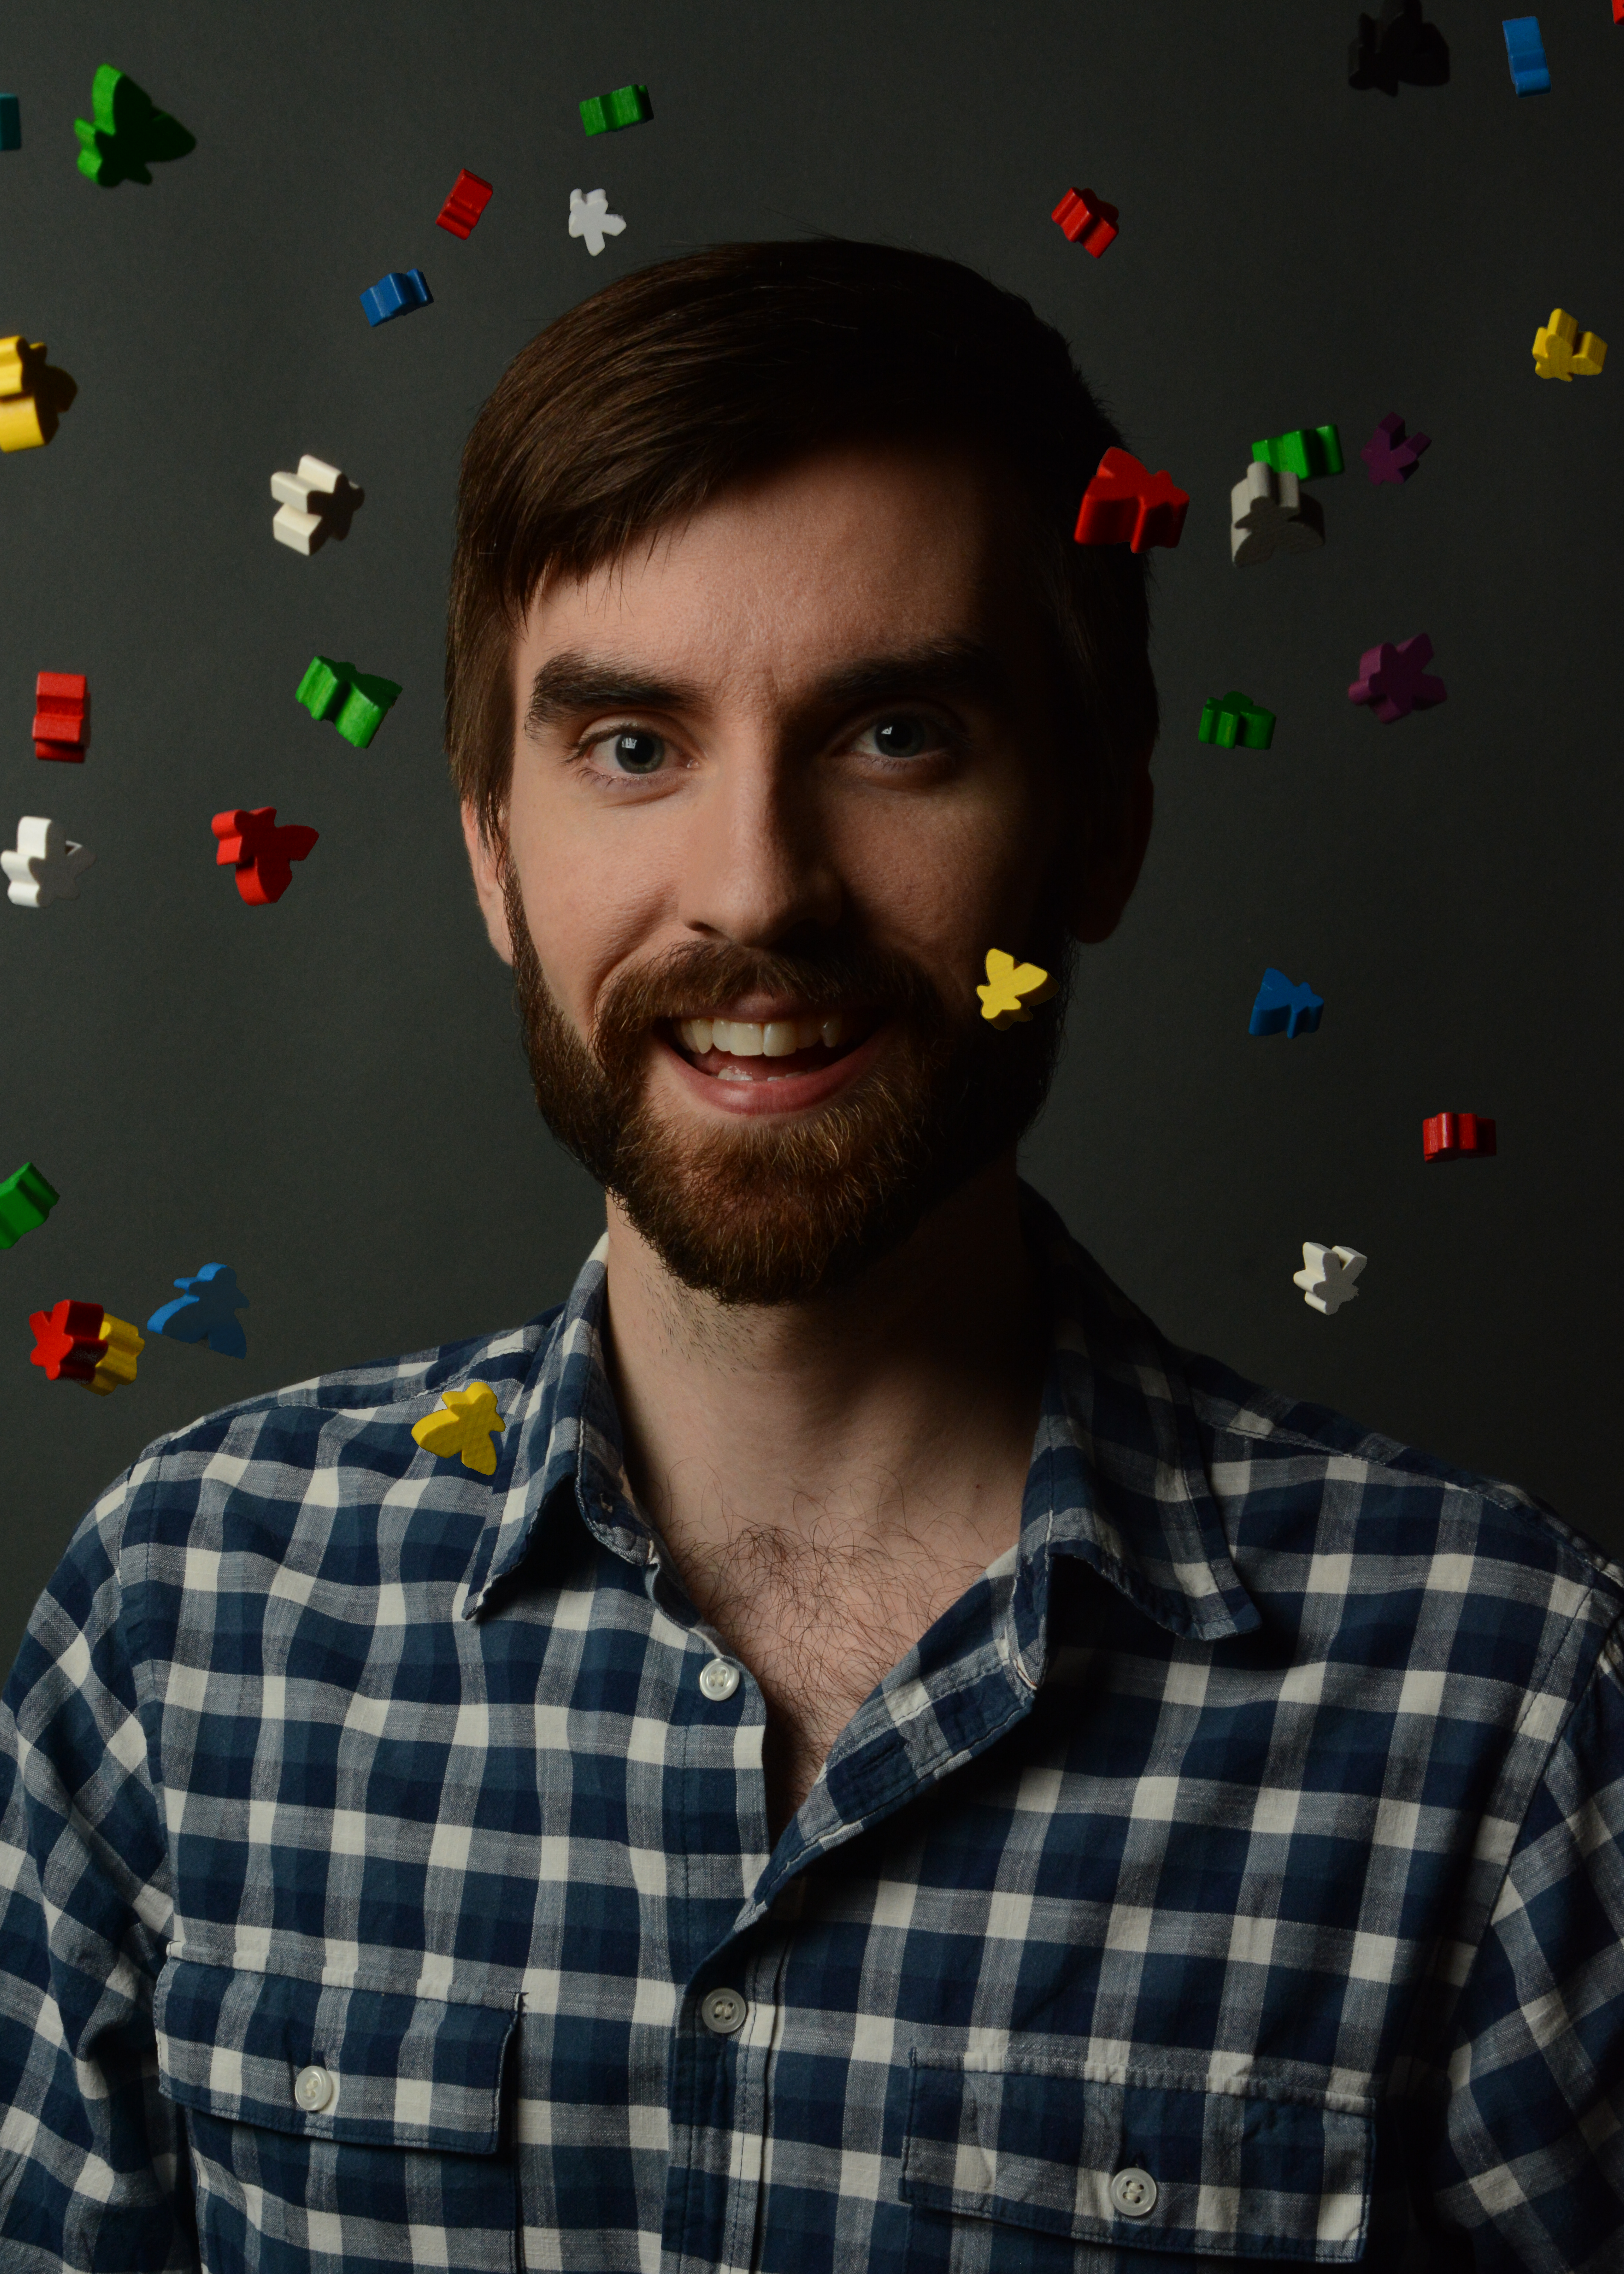 Dsvid Van Drunen smiling brightly into the camera, his checked shirt opened casually at the collar, while multi-coloured meeples rain down around him